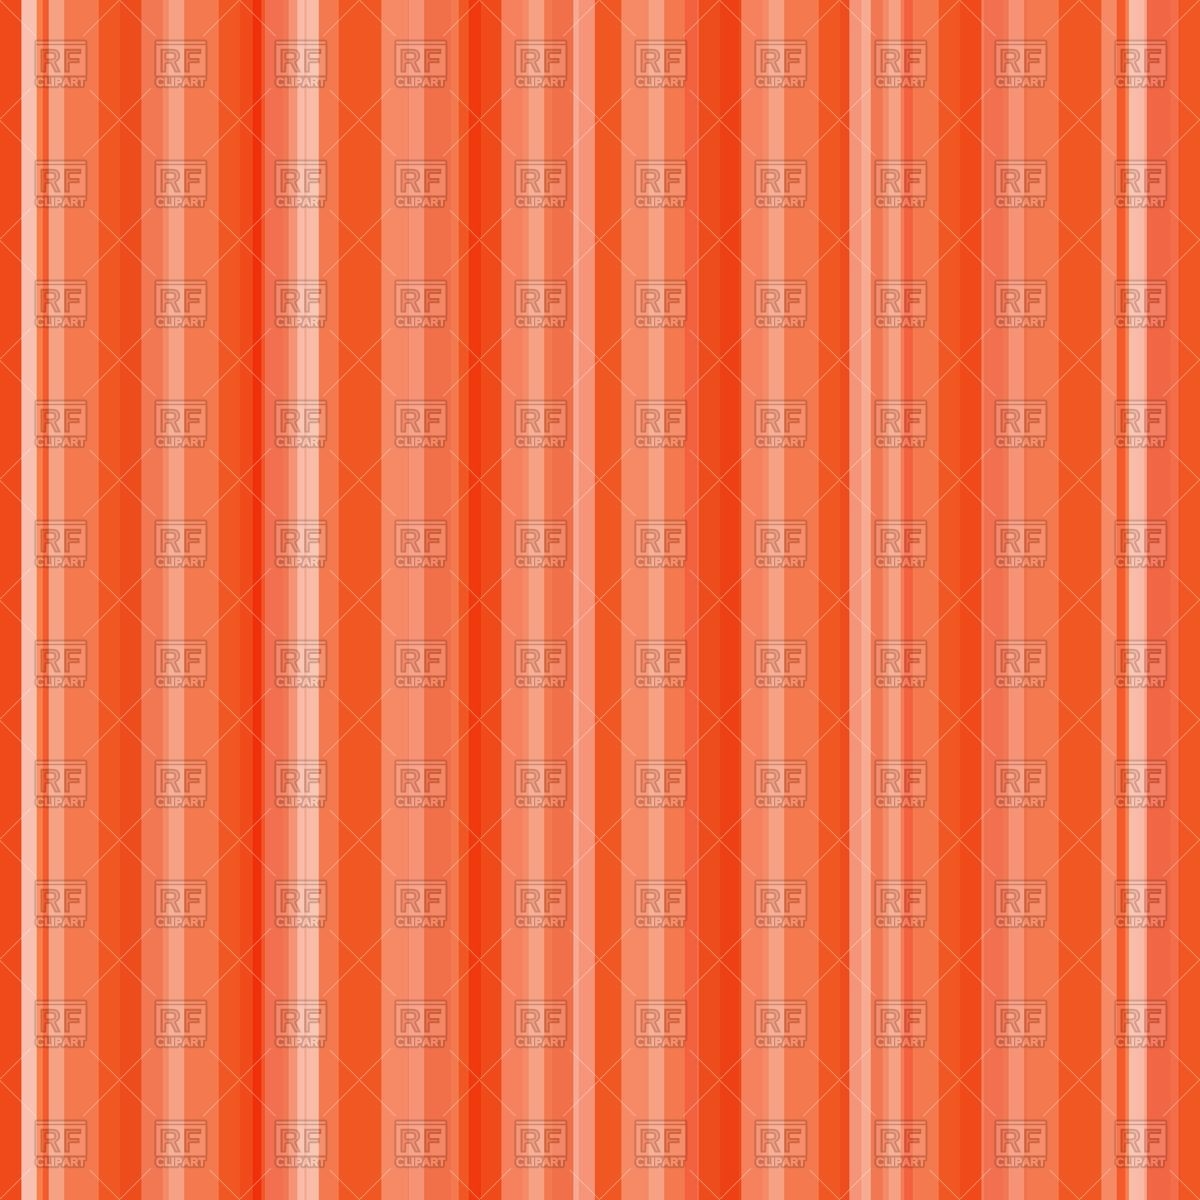 Abstract Orange Striped Wallpaper Vector Image Vector - Orange Striped - HD Wallpaper 